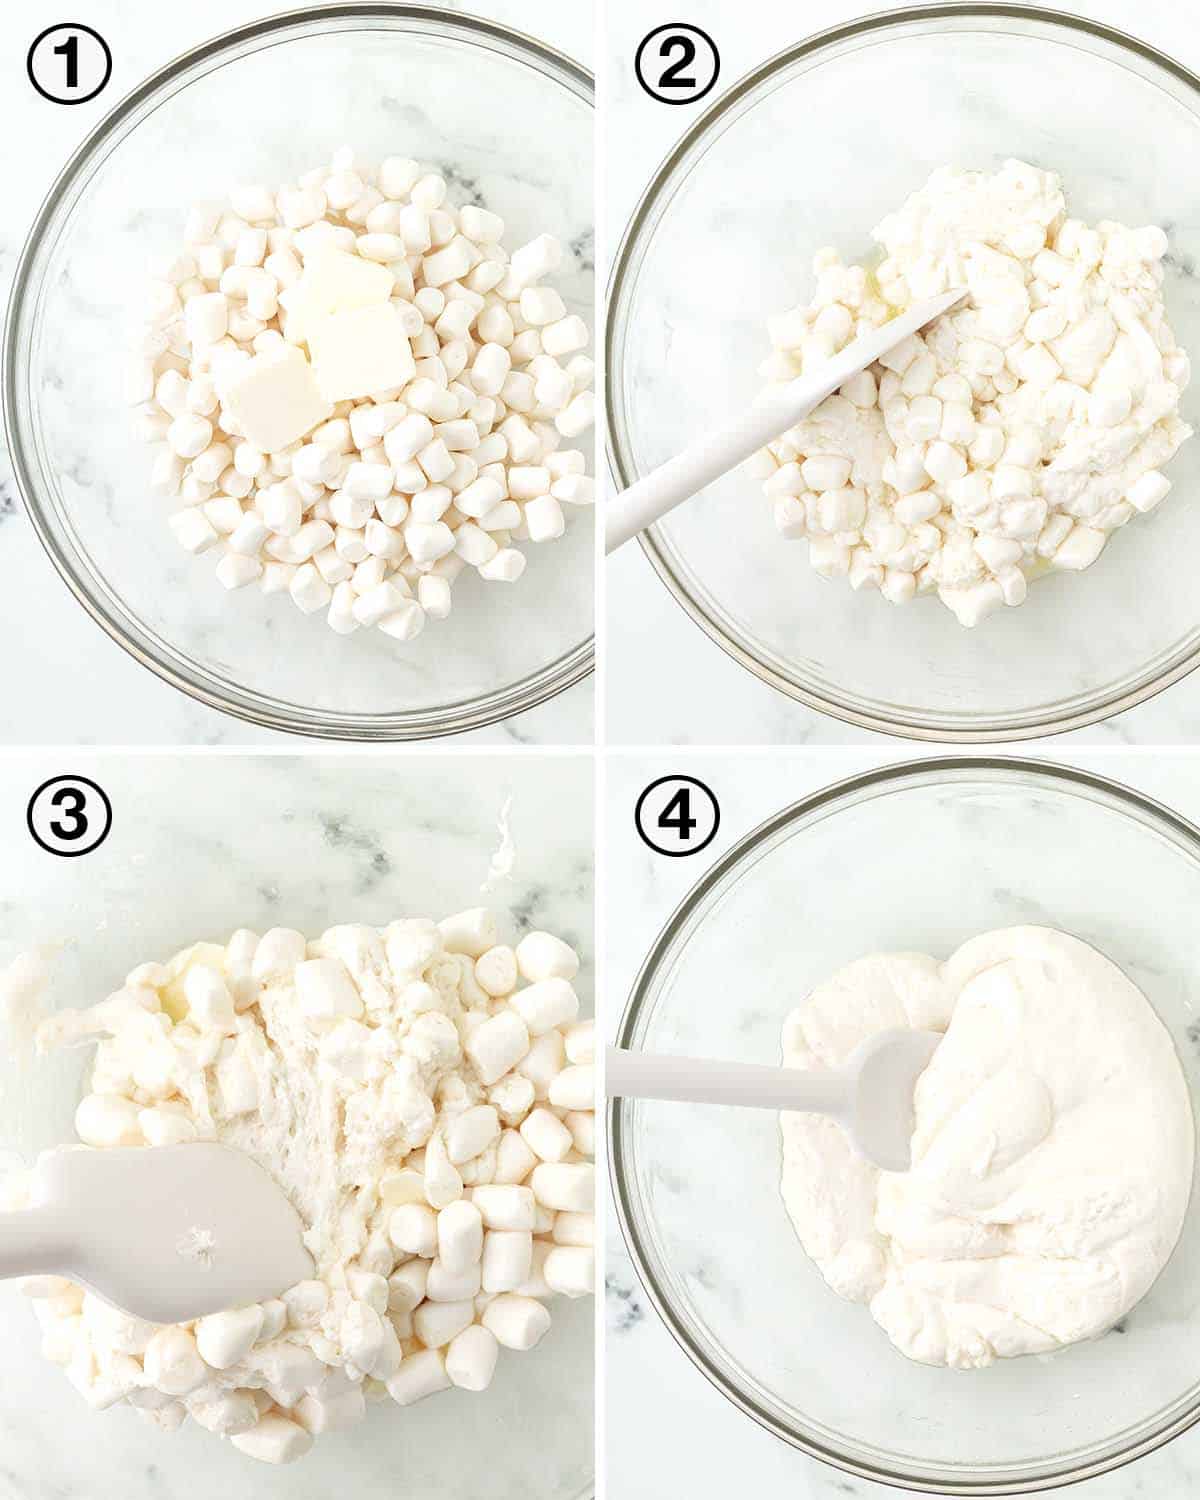 A collage of four images showing the first sequence of steps needed to make vegan strawberry rice crispy treats.